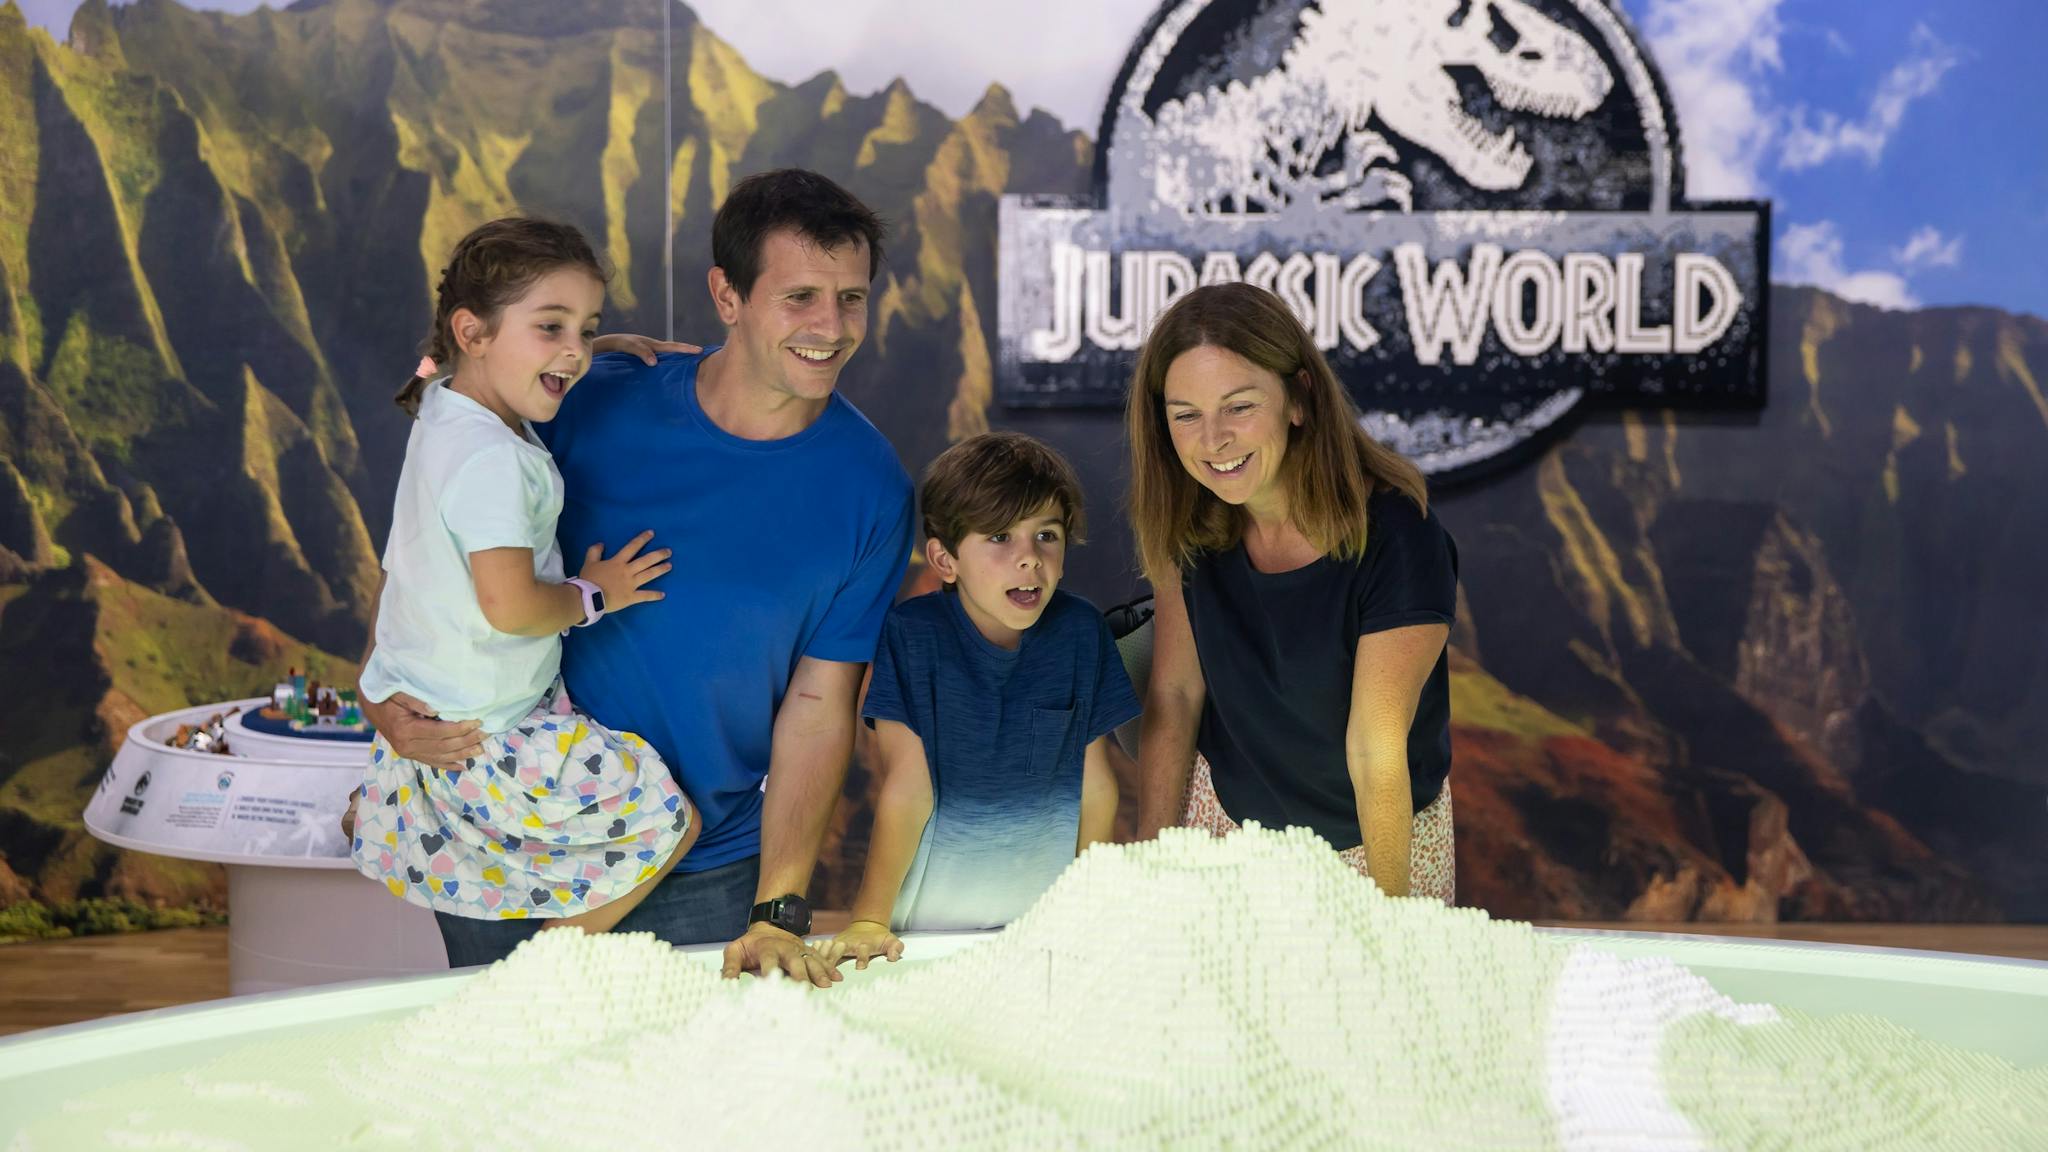 A family with young children at Jurassic World by Brickman exhibition